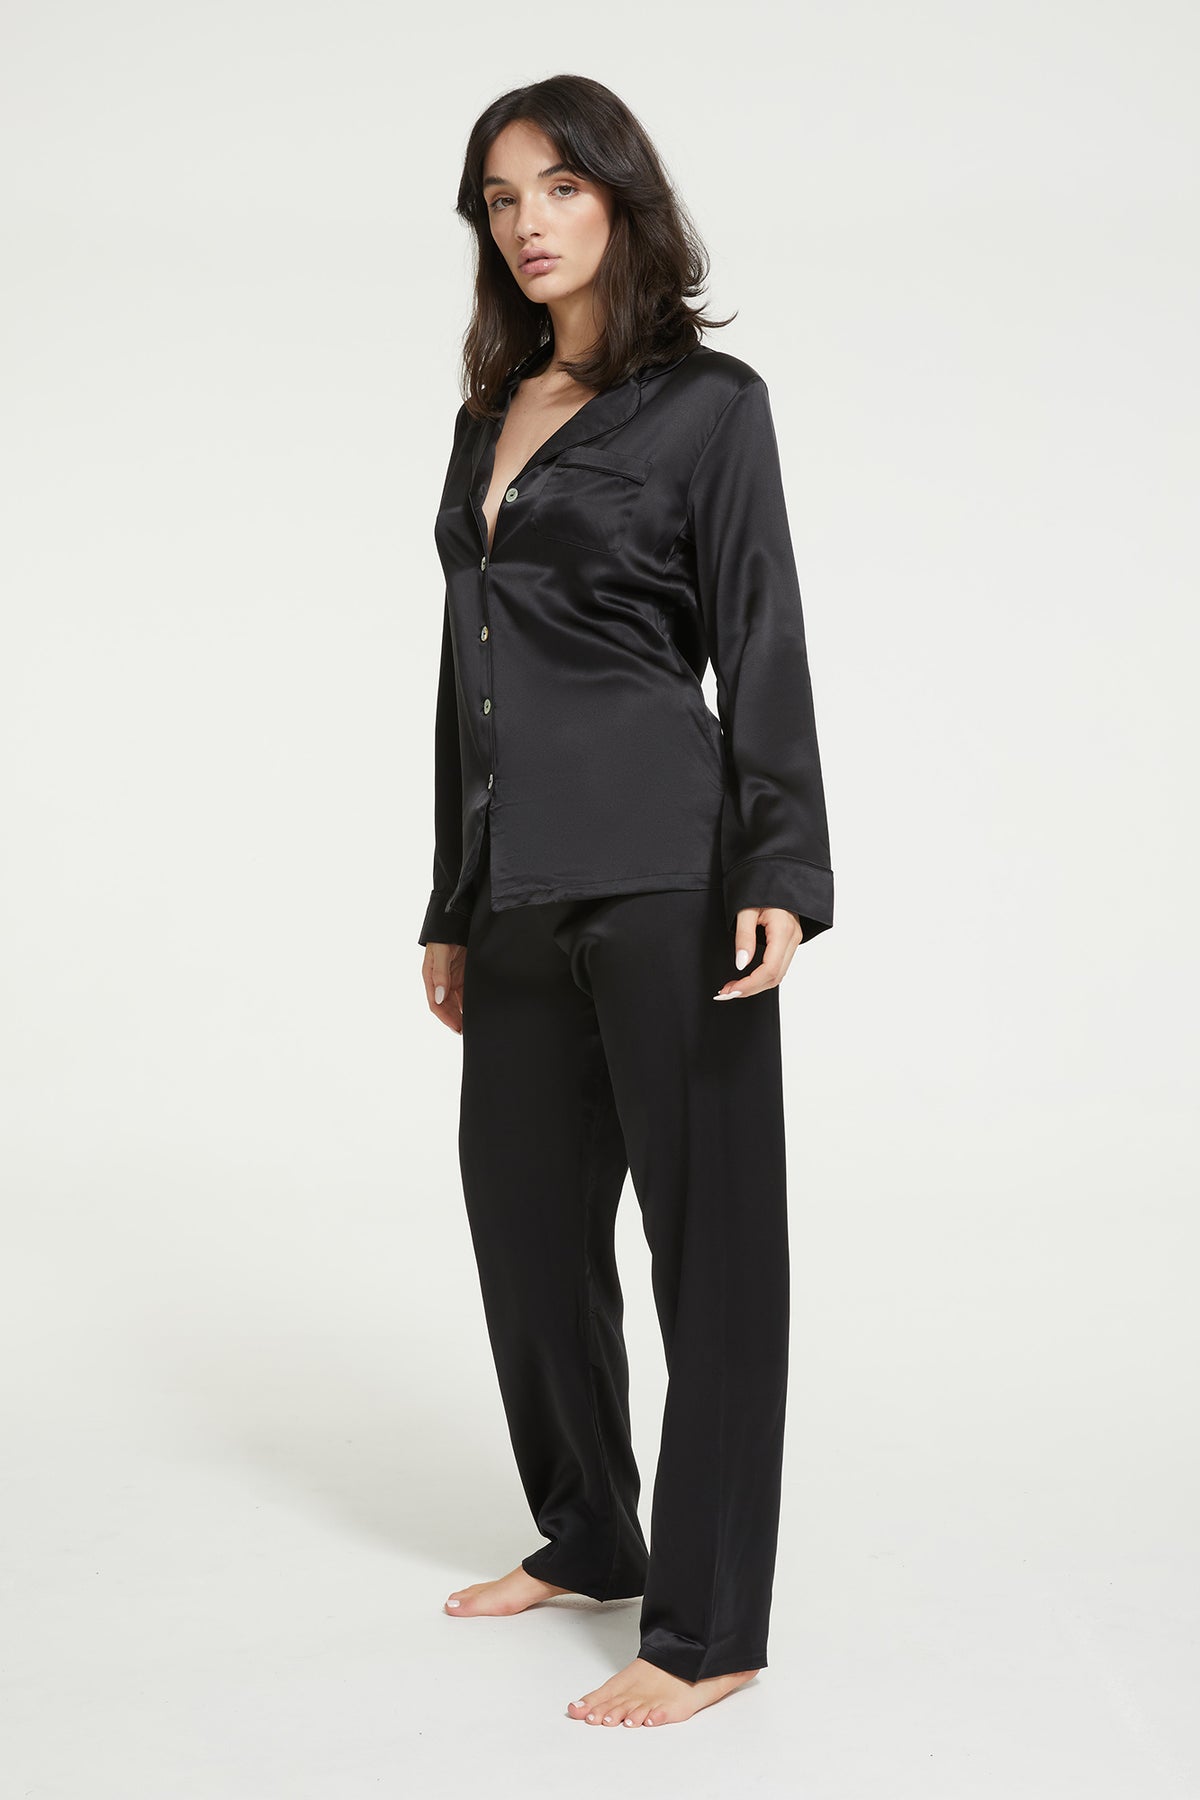 The Fine Finishes Pyjama By GINIA In Black